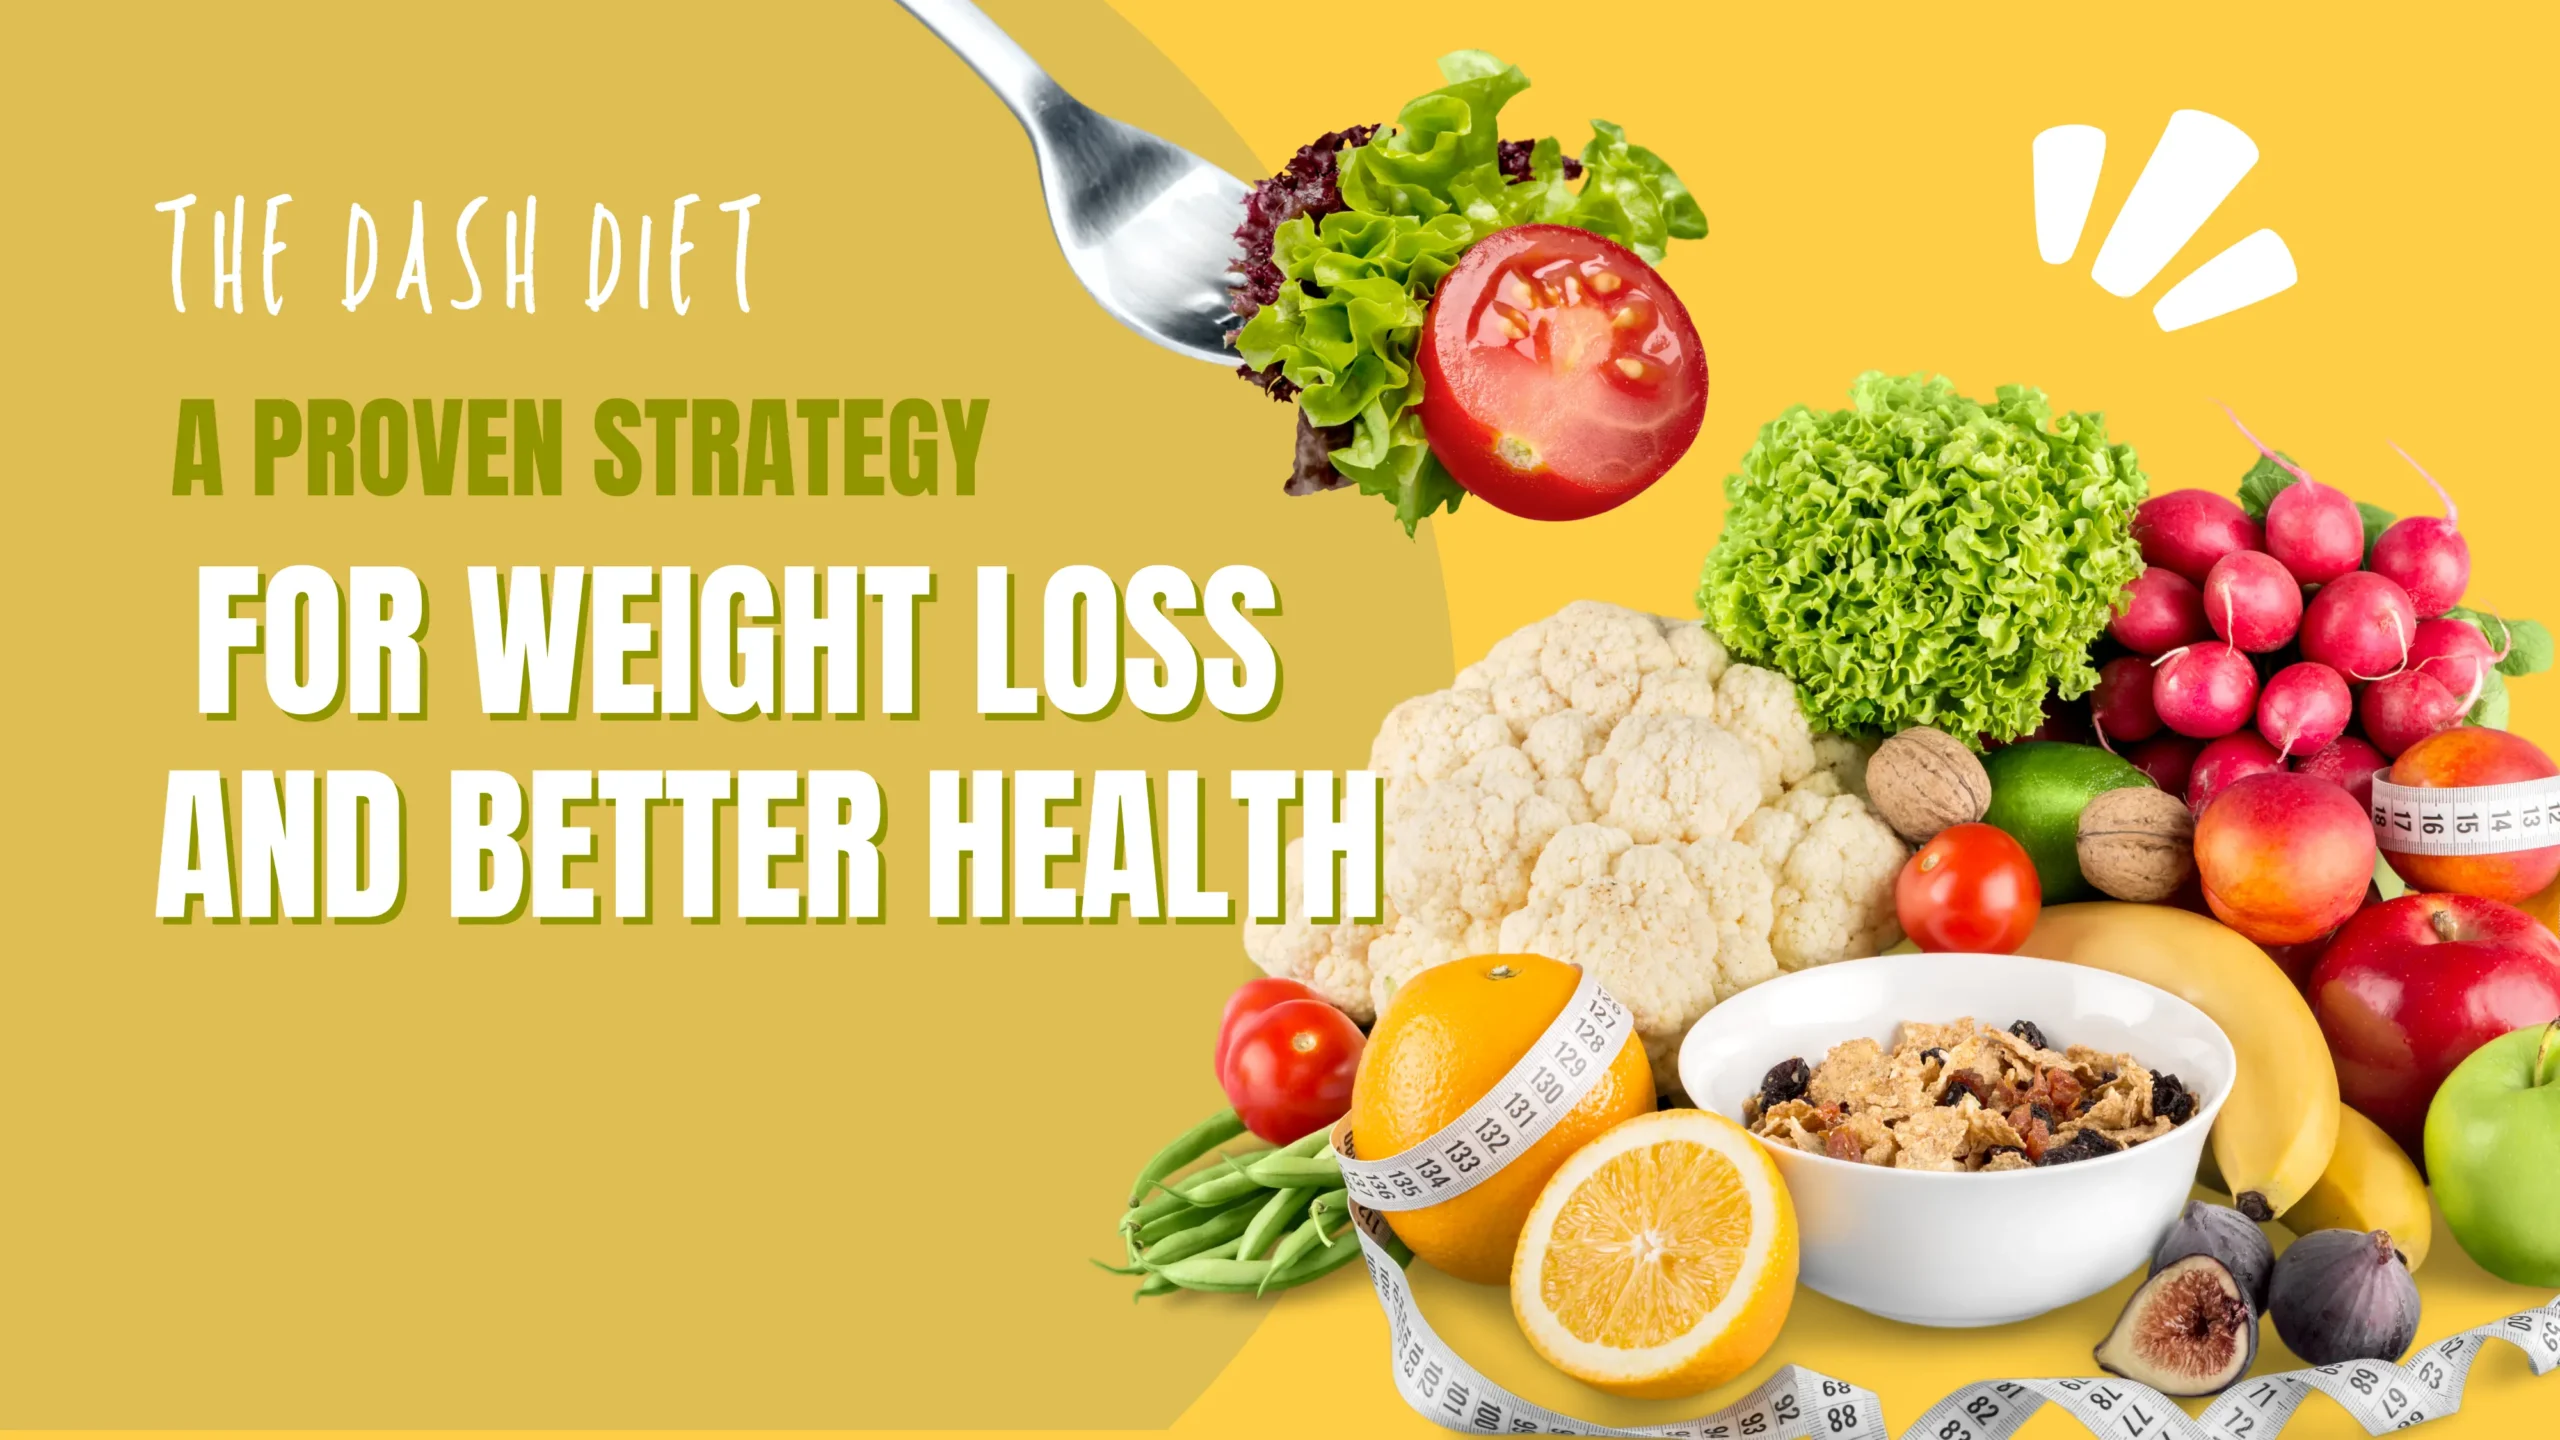 The DASH Diet - A Proven Strategy for Weight Loss and Better Health